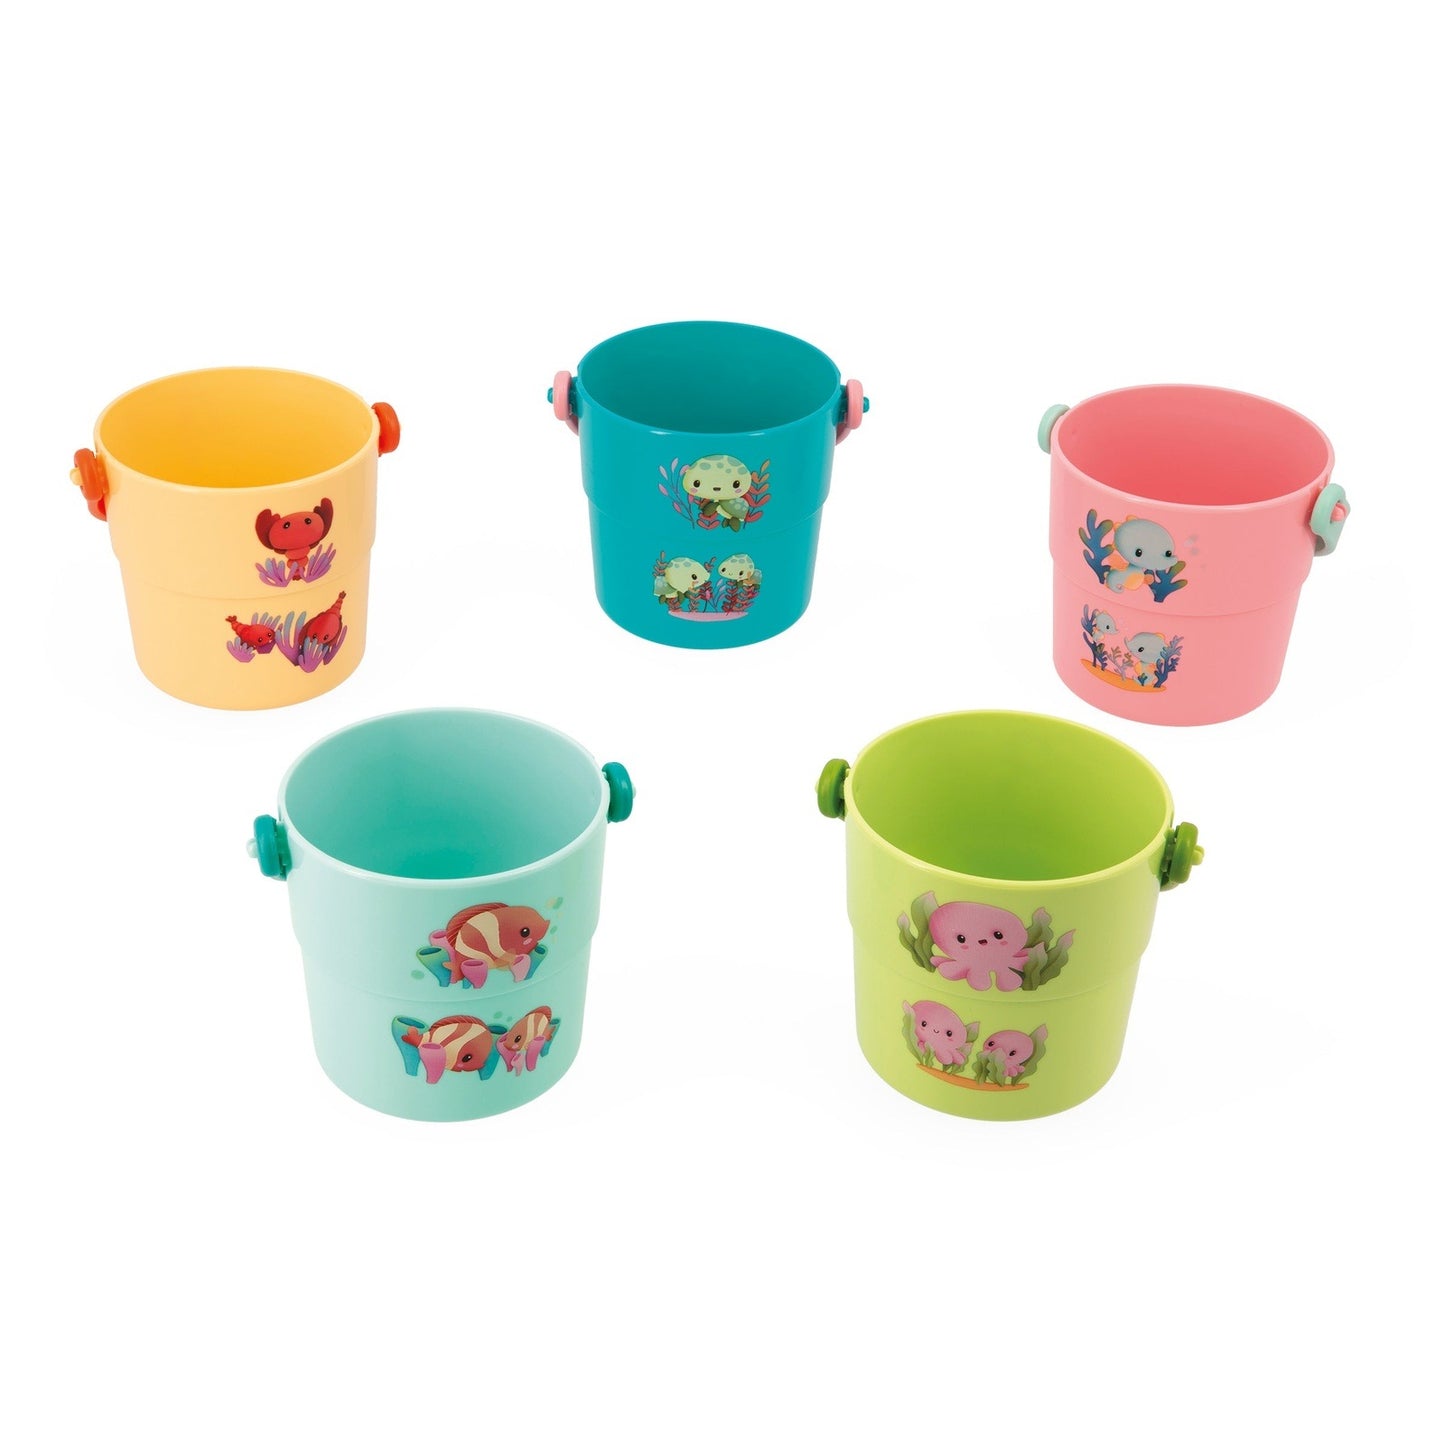 Janod 5 Activity Bath Buckets Toy-My Baby Animals, Bath Toys for Kids, Bath Toys for Babies, Fun Bath Toys, Janod Stockist, Janod Bath Toys, Modern Kids Store 